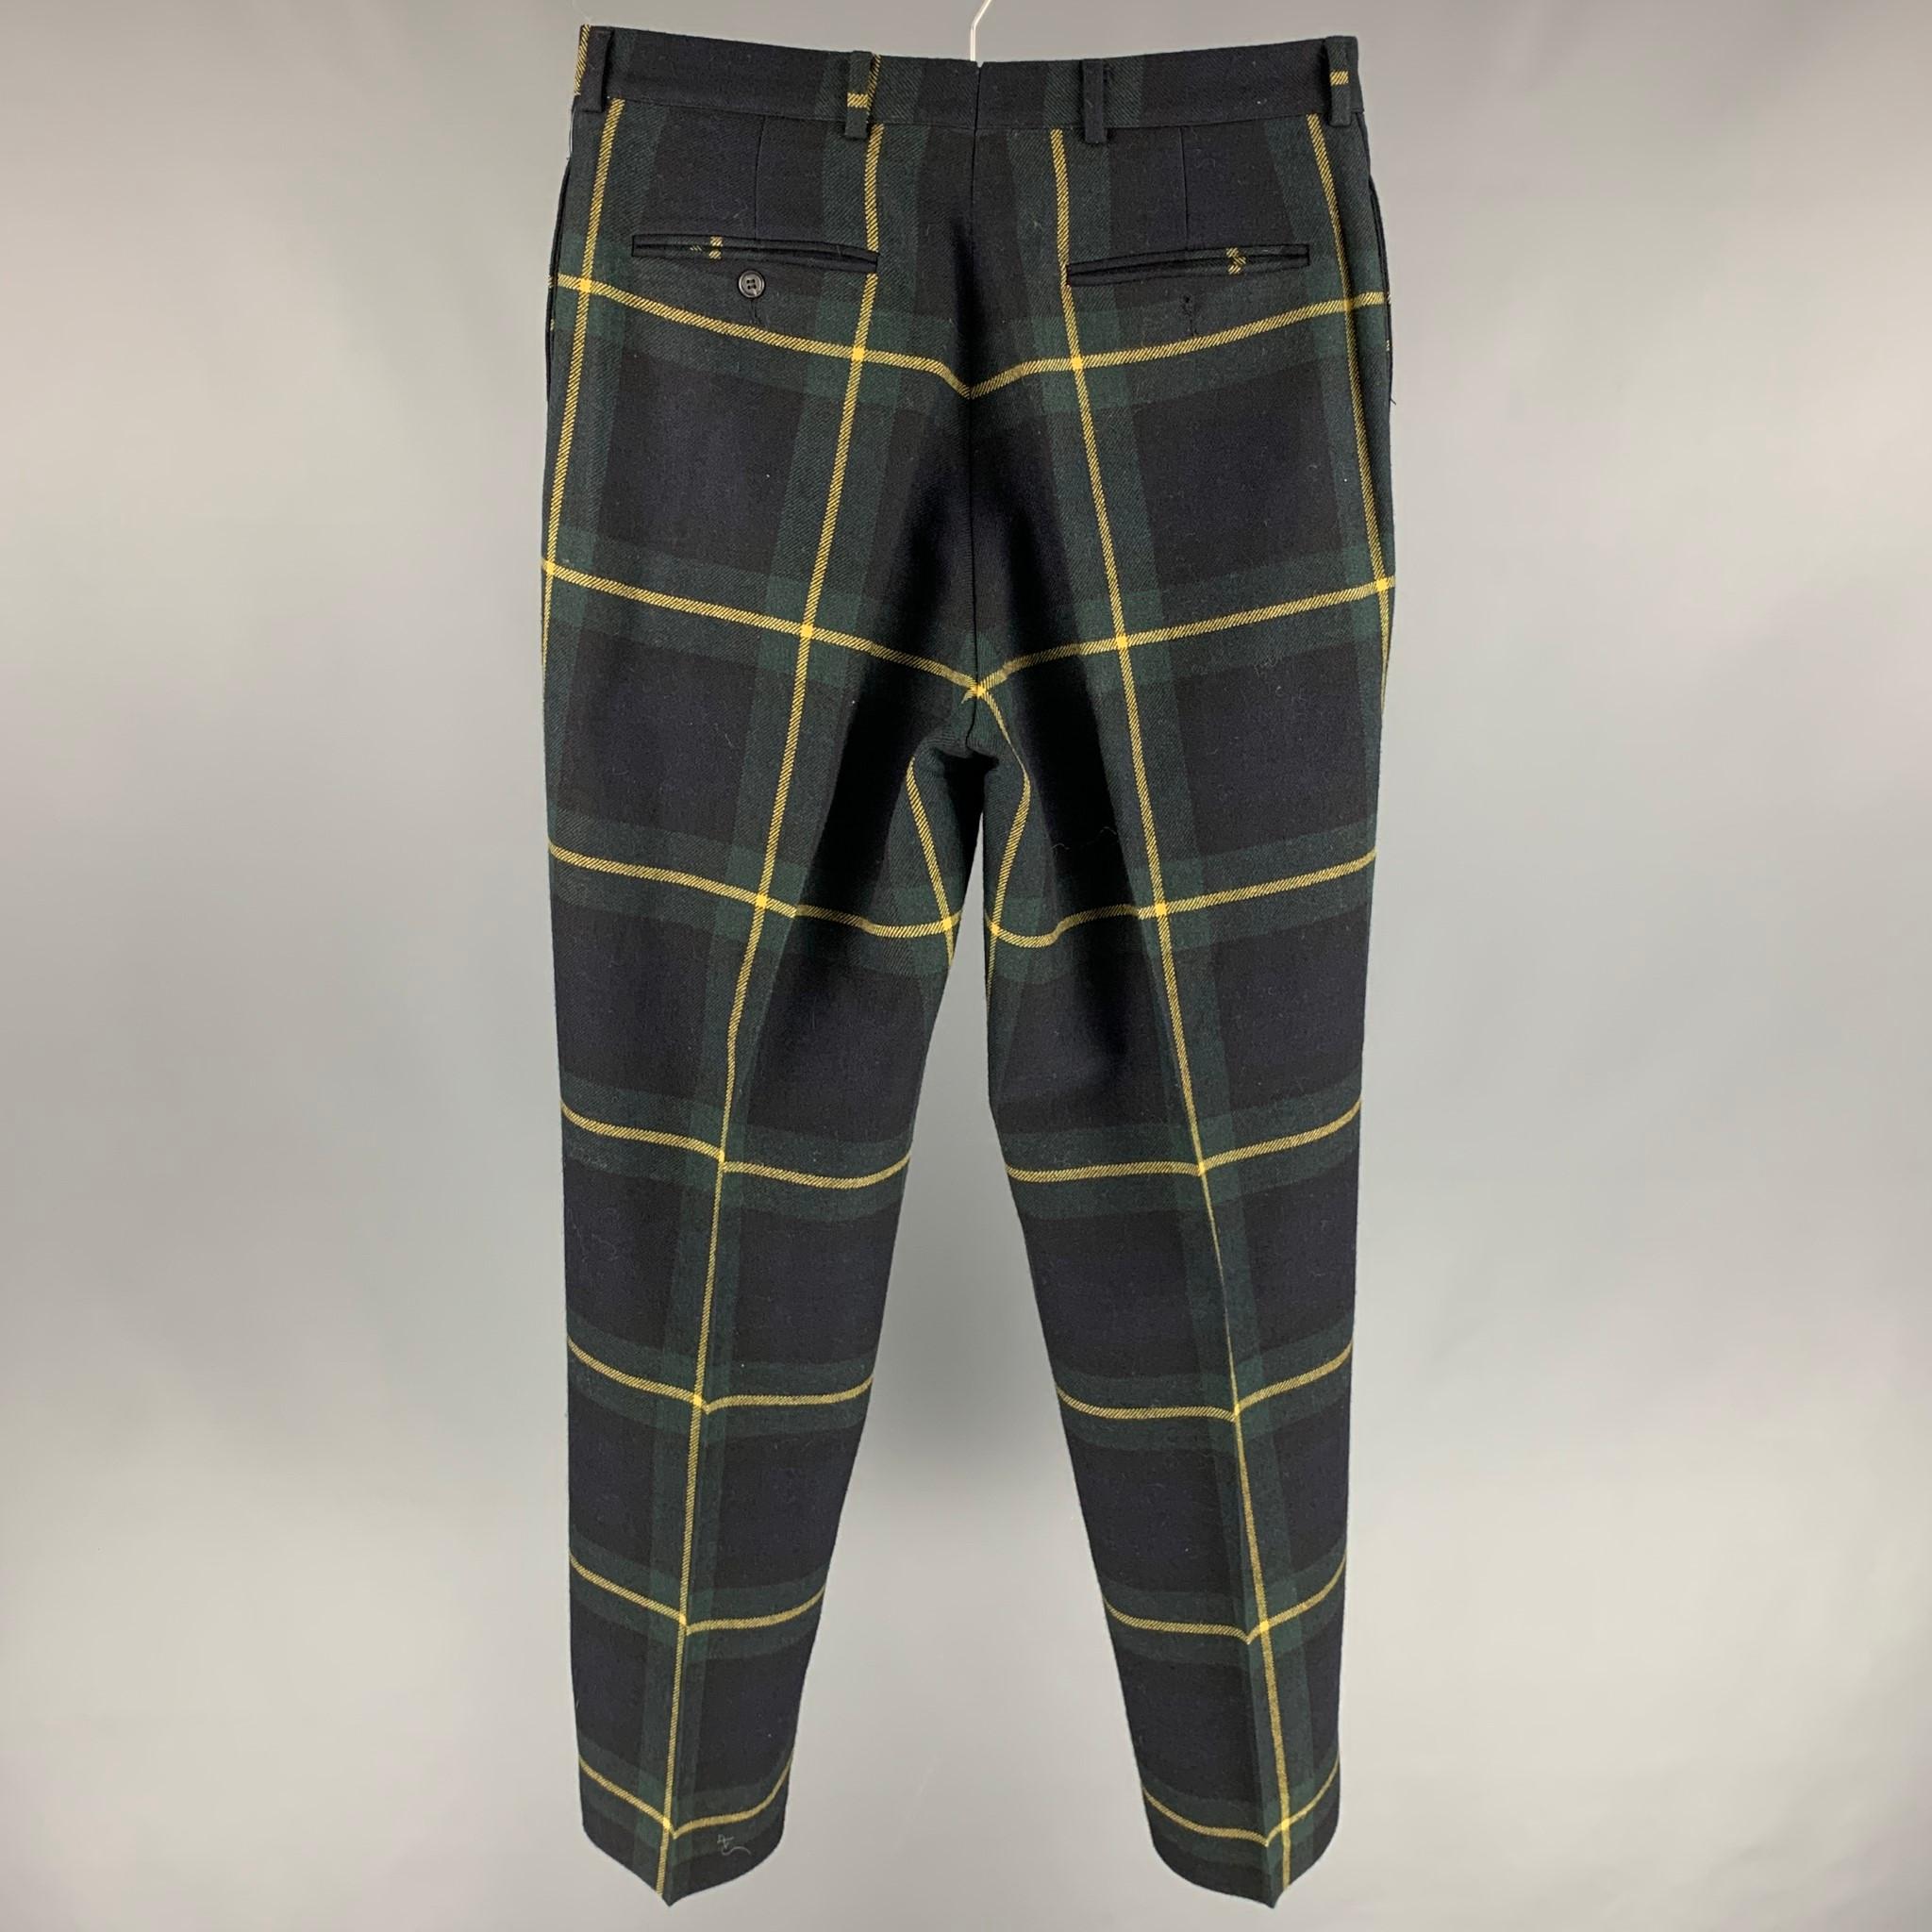 RRL by RALPH LAUREN dress pants comes in a navy & black plaid wool featuring a flat front, straight leg, and a button fly closure. Made in USA. 

Very Good Pre-Owned Condition.
Marked: Size tag removed.

Measurements:

Waist: 32 in.
Rise: 13